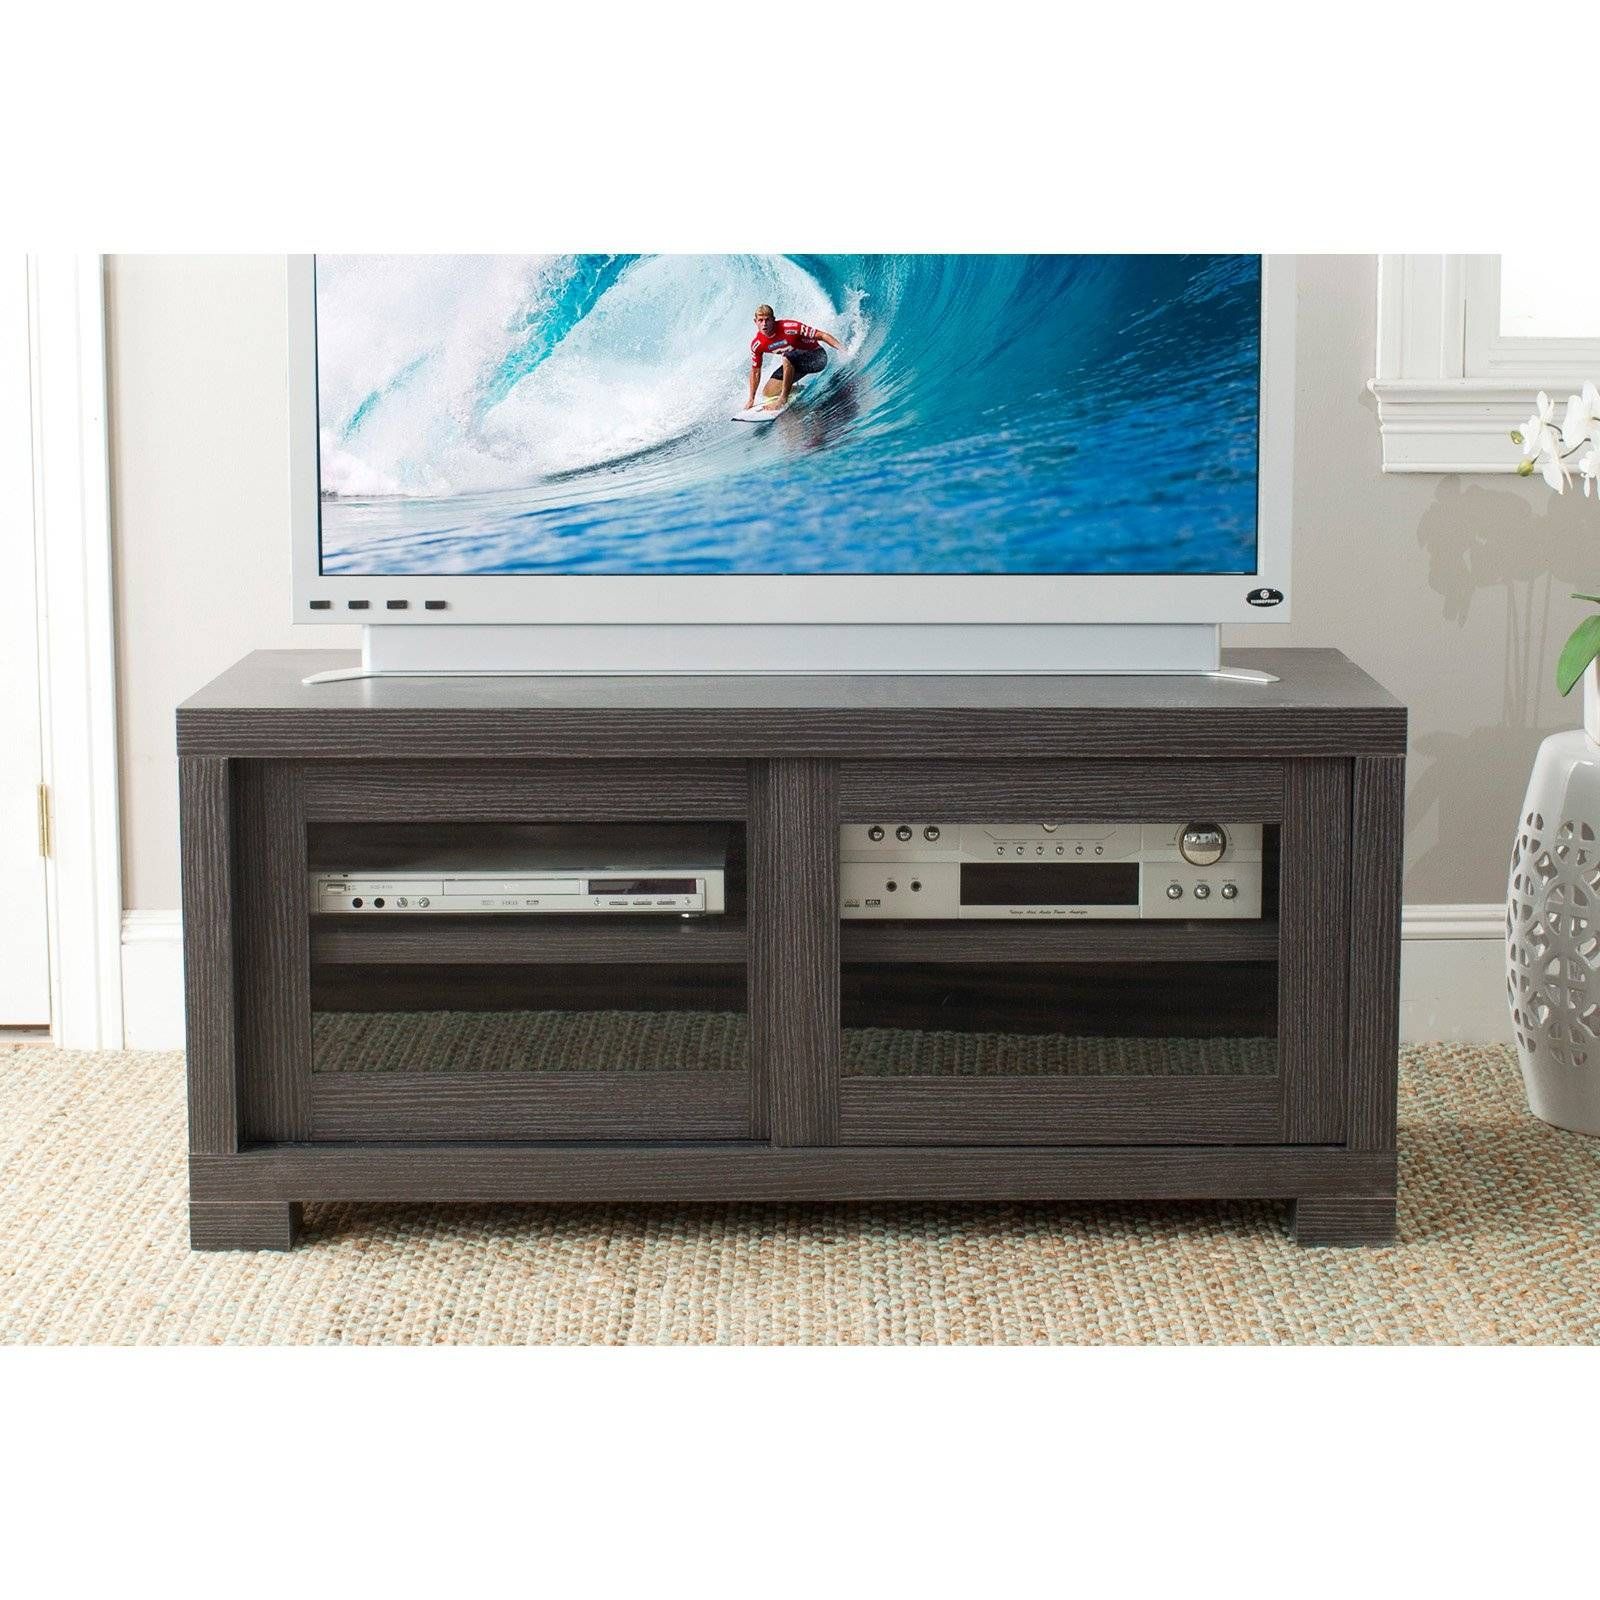 Modern Black Walnut Wood Tv Cabinet With Sliding Glass Doors Of Intended For Wooden Tv Stands And Cabinets (View 13 of 15)